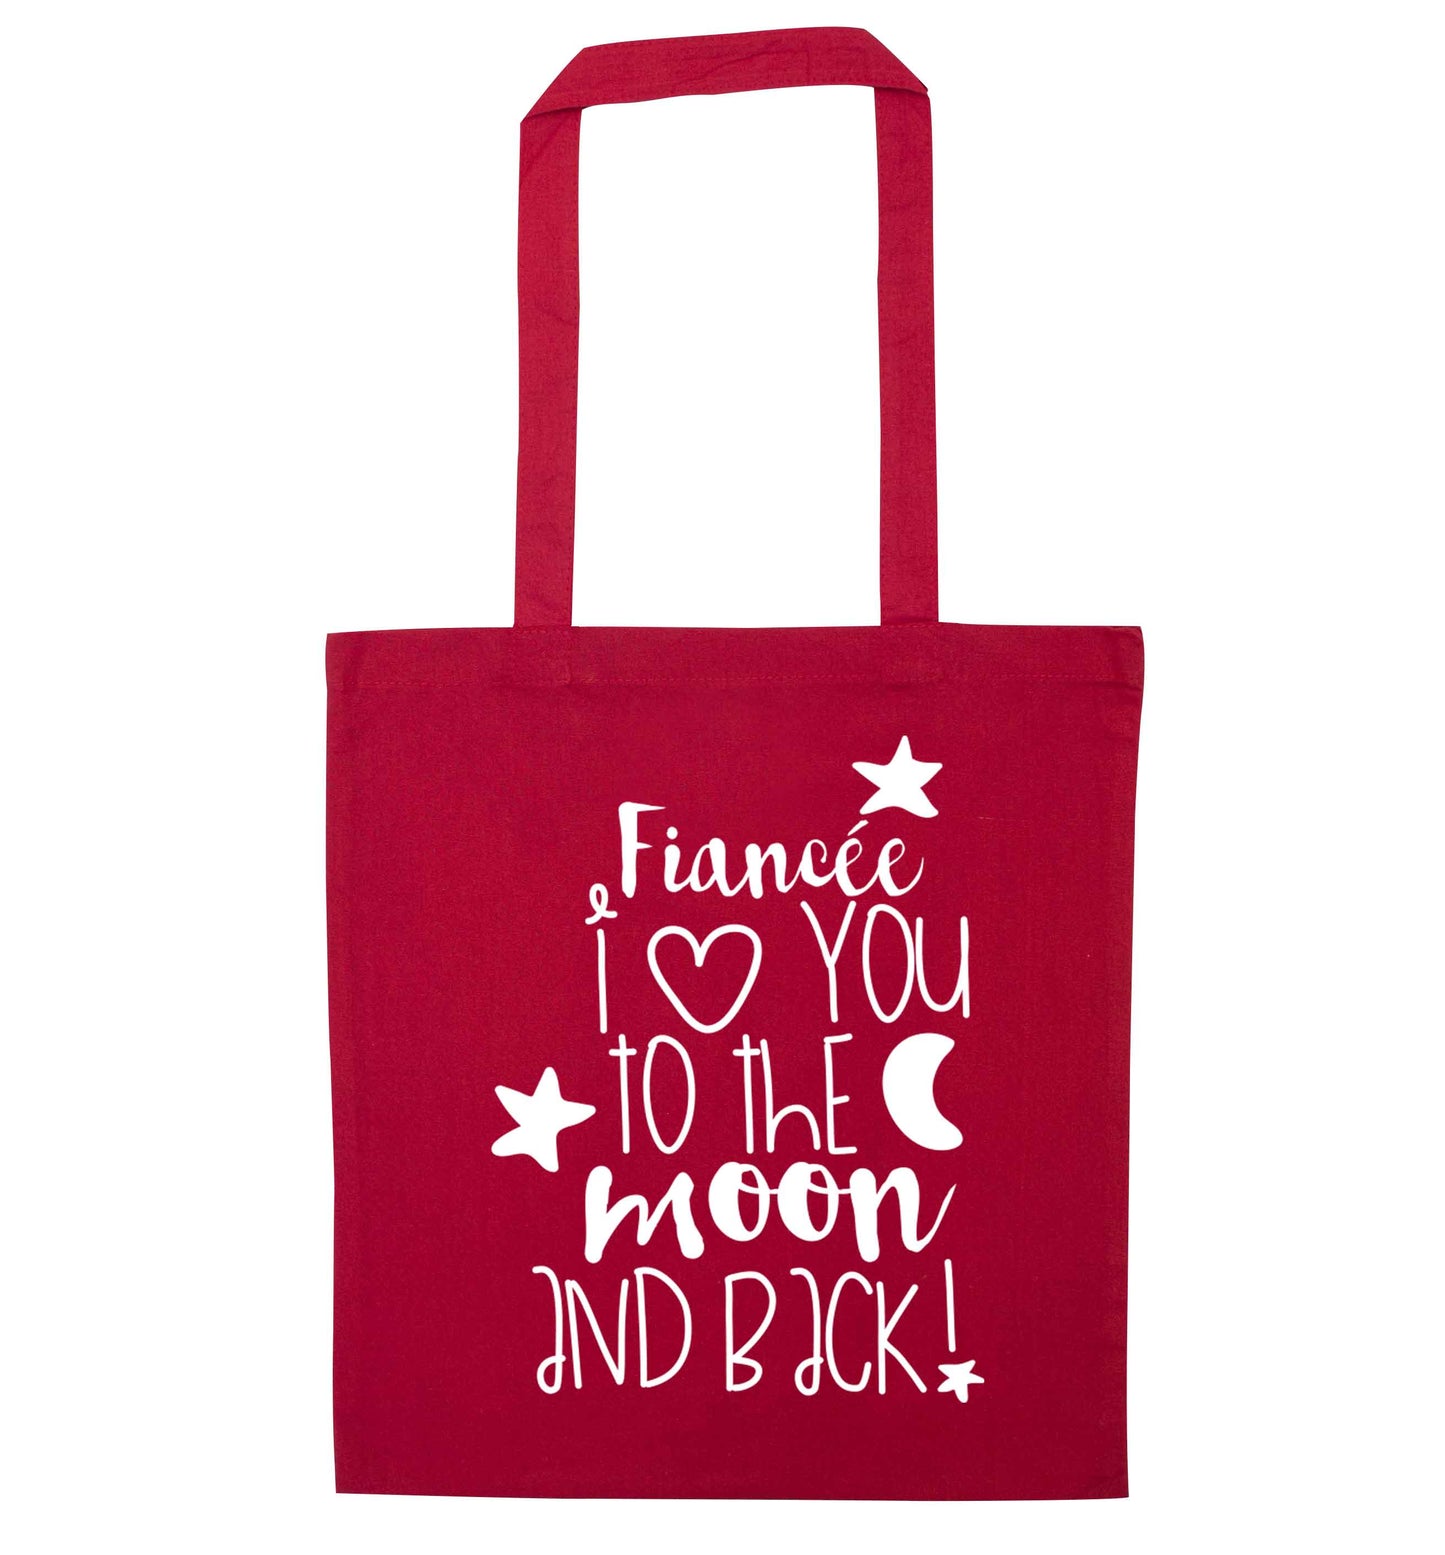 Fiancée I love you to the moon and back red tote bag